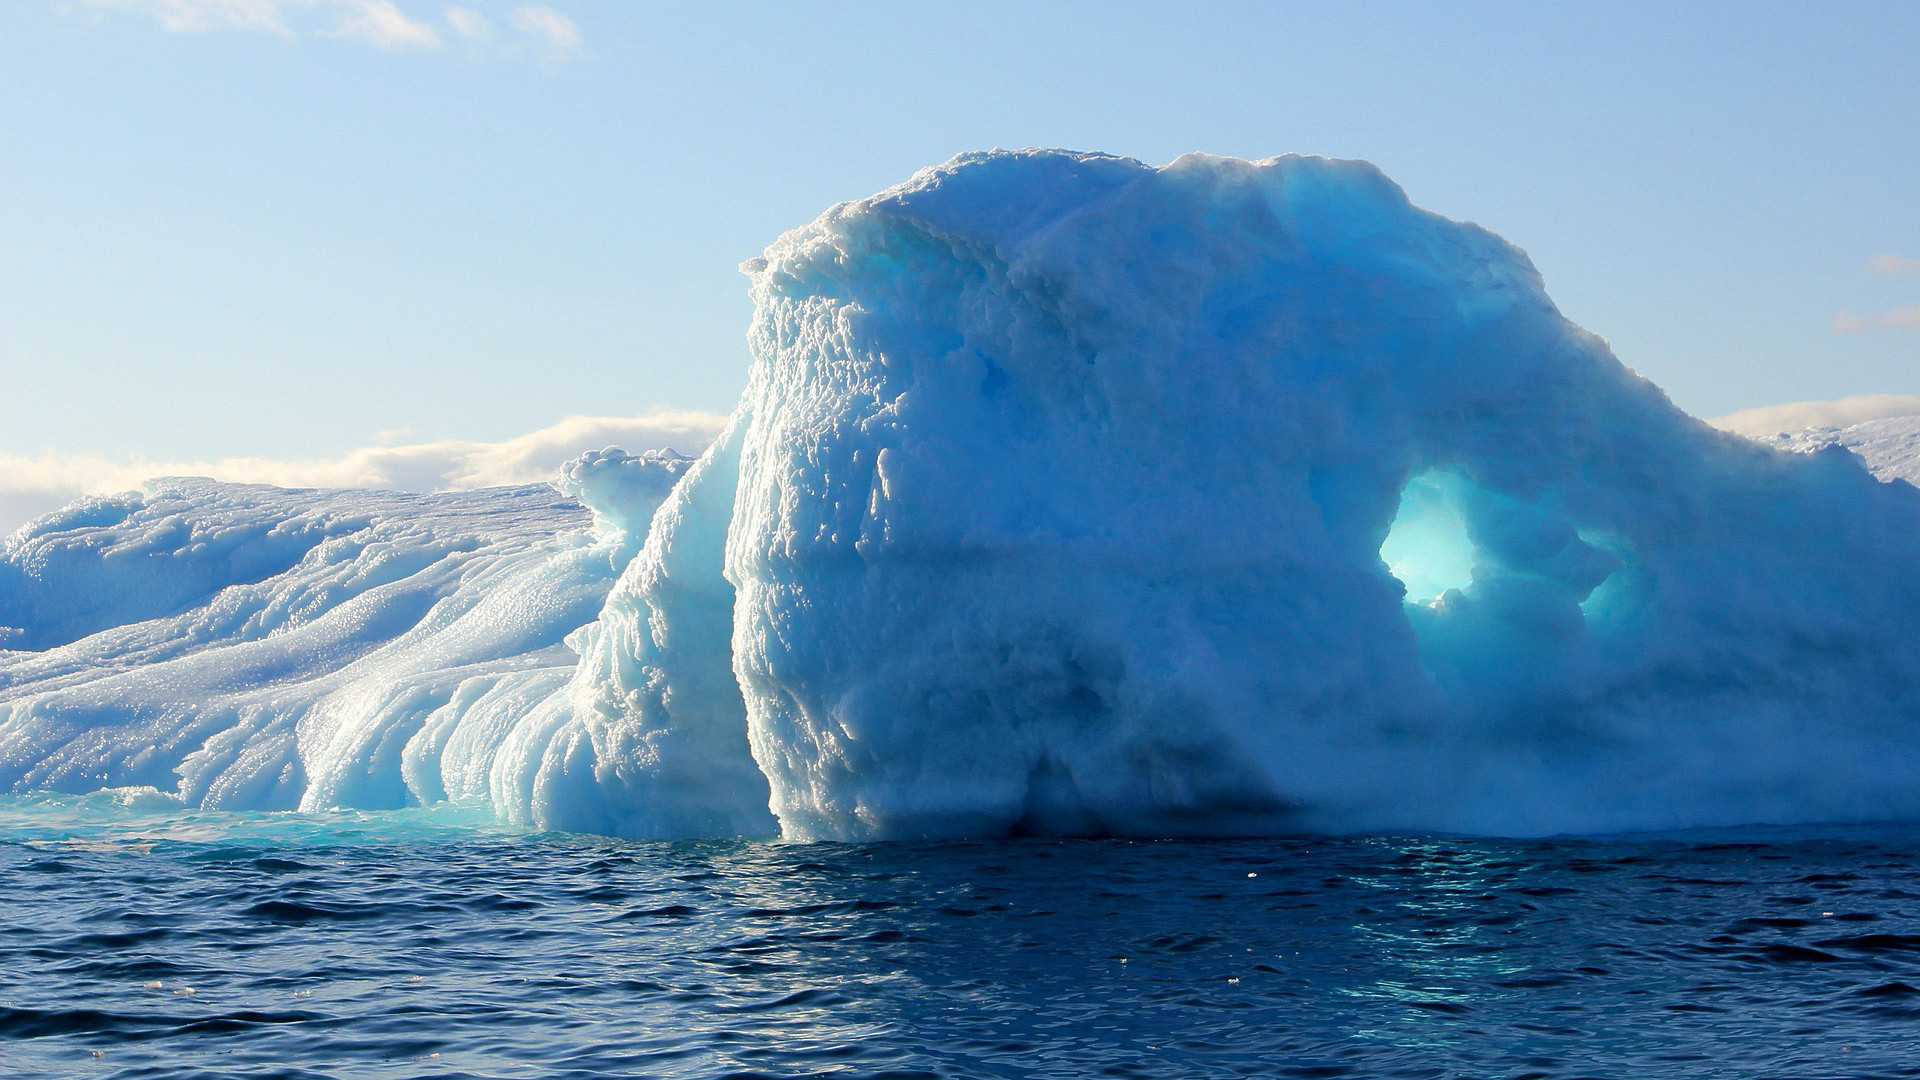 A blue and white iceberg rises out of the water at an icy landscape